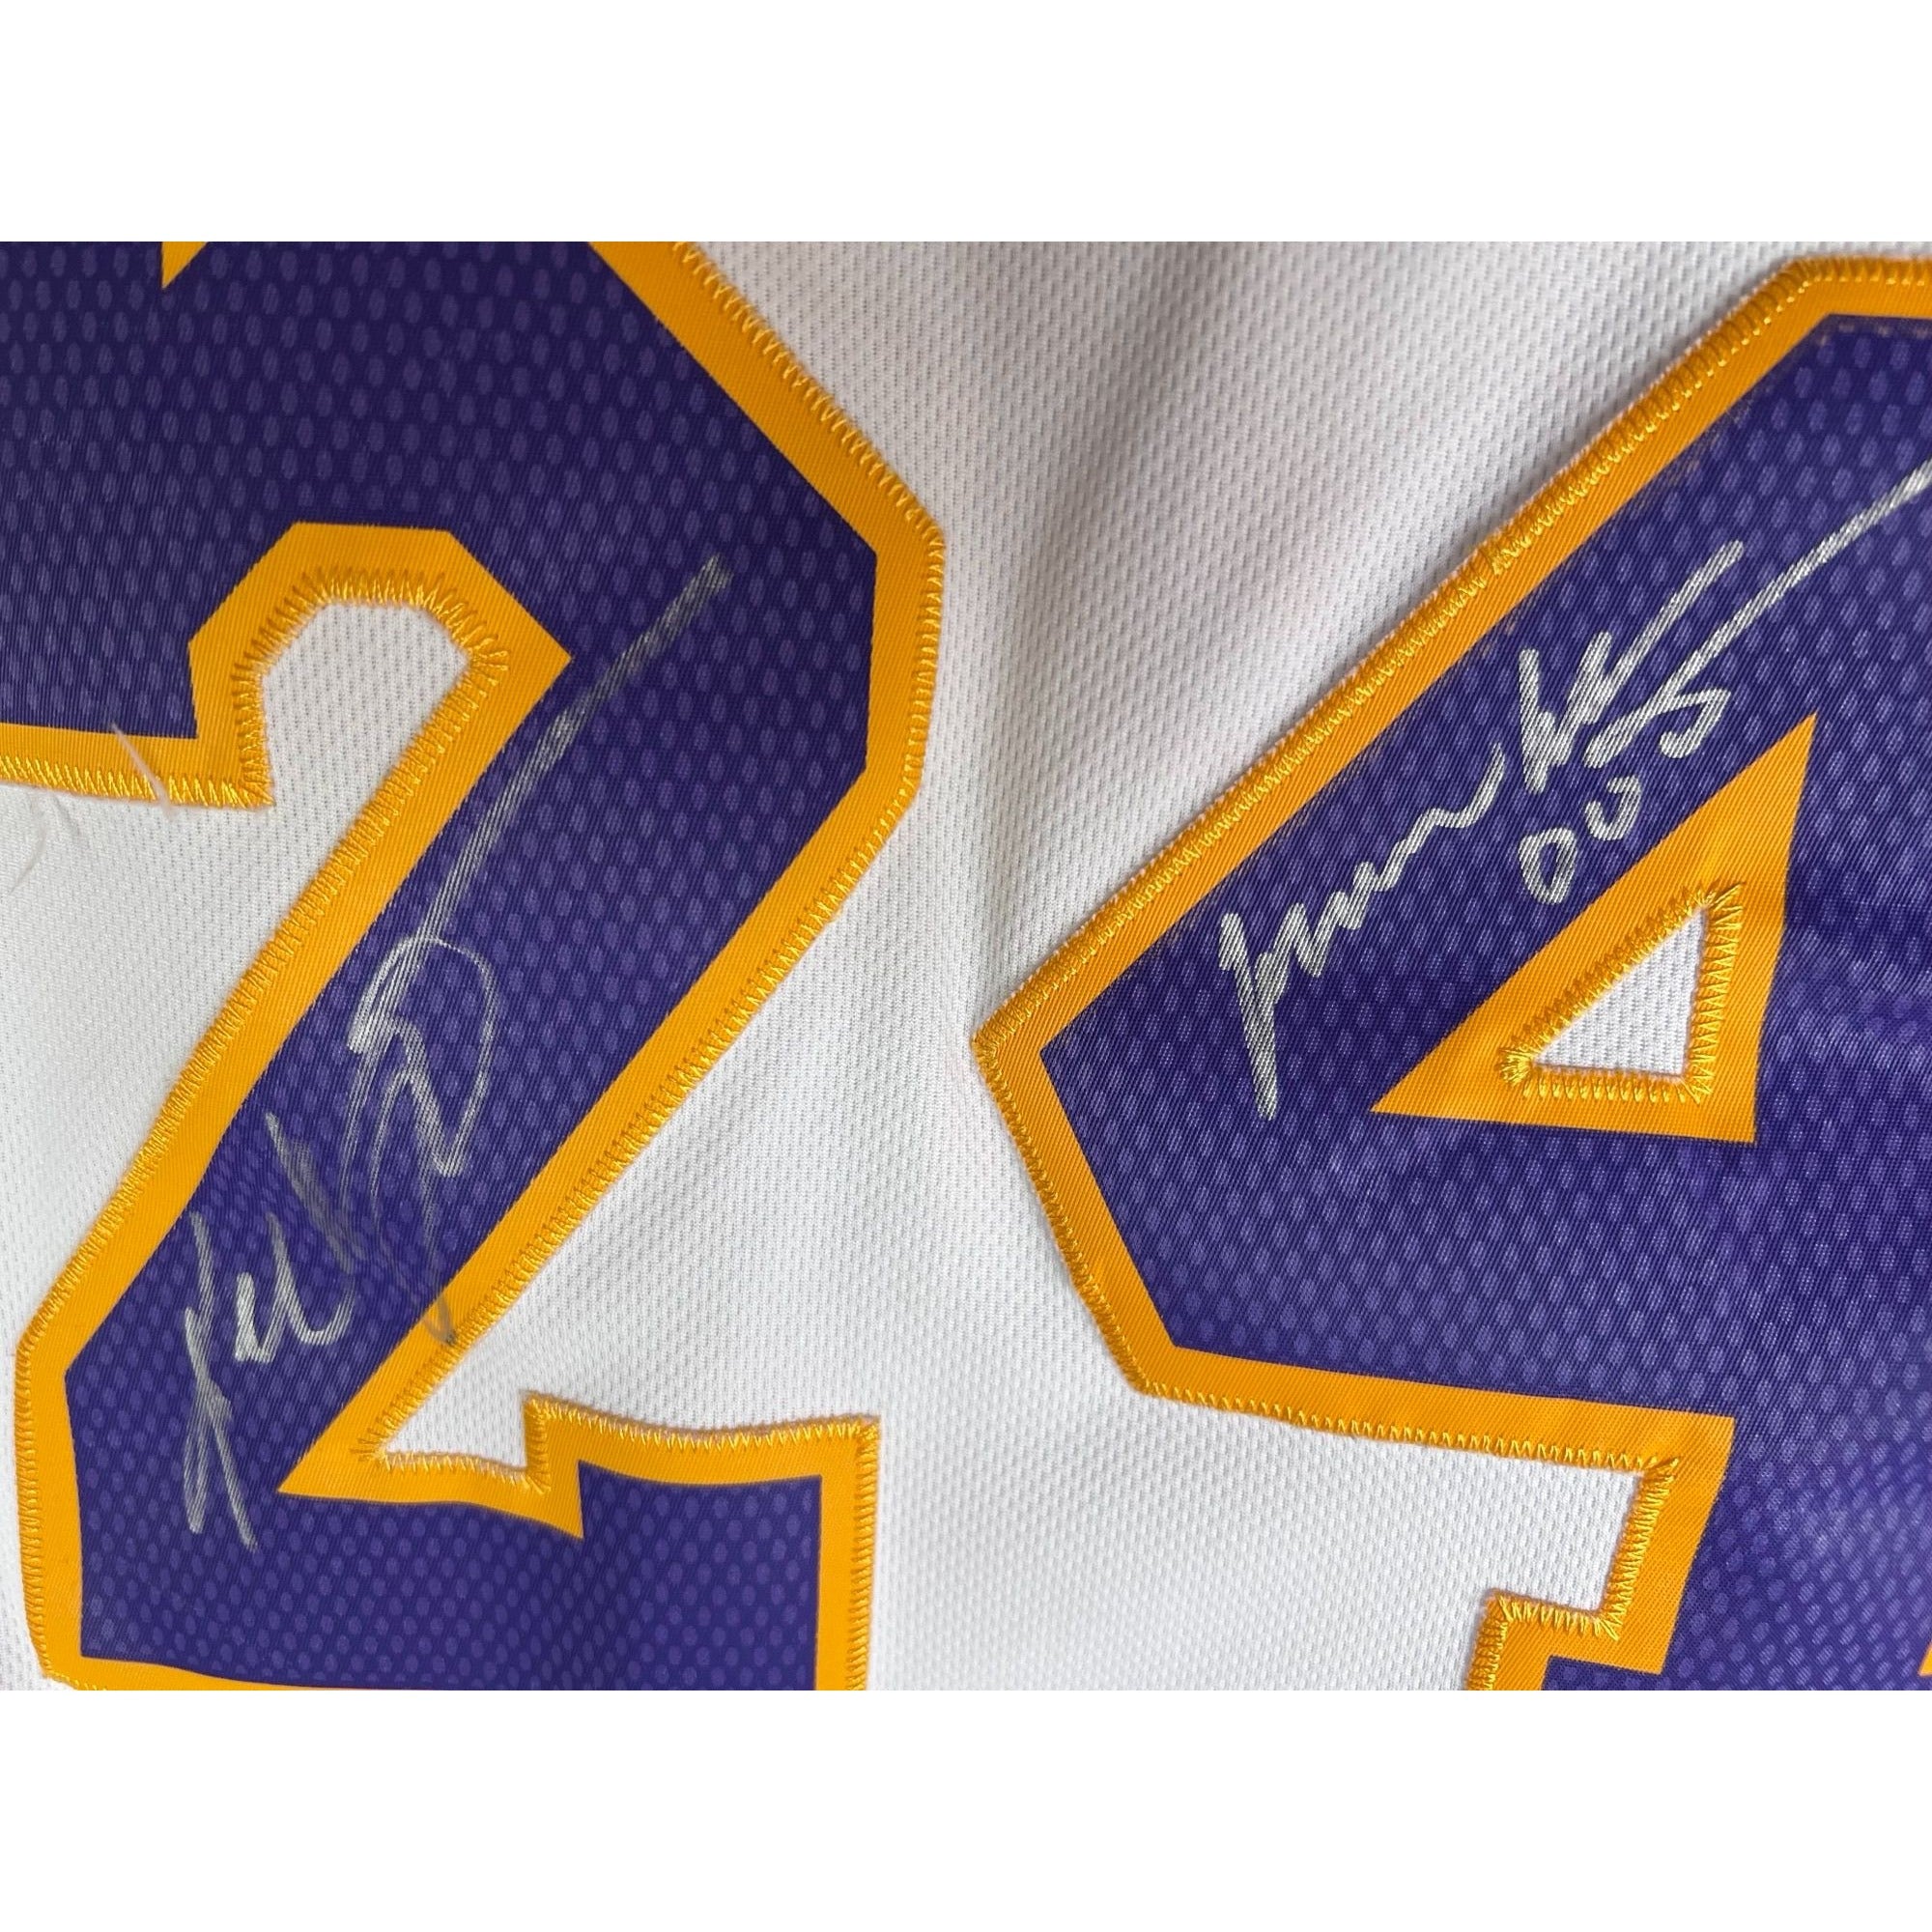 Kobe Bryant signed and inscribed "Black Mamba" Los Ageles Lakers (SIZE LARGE) jersey with proof